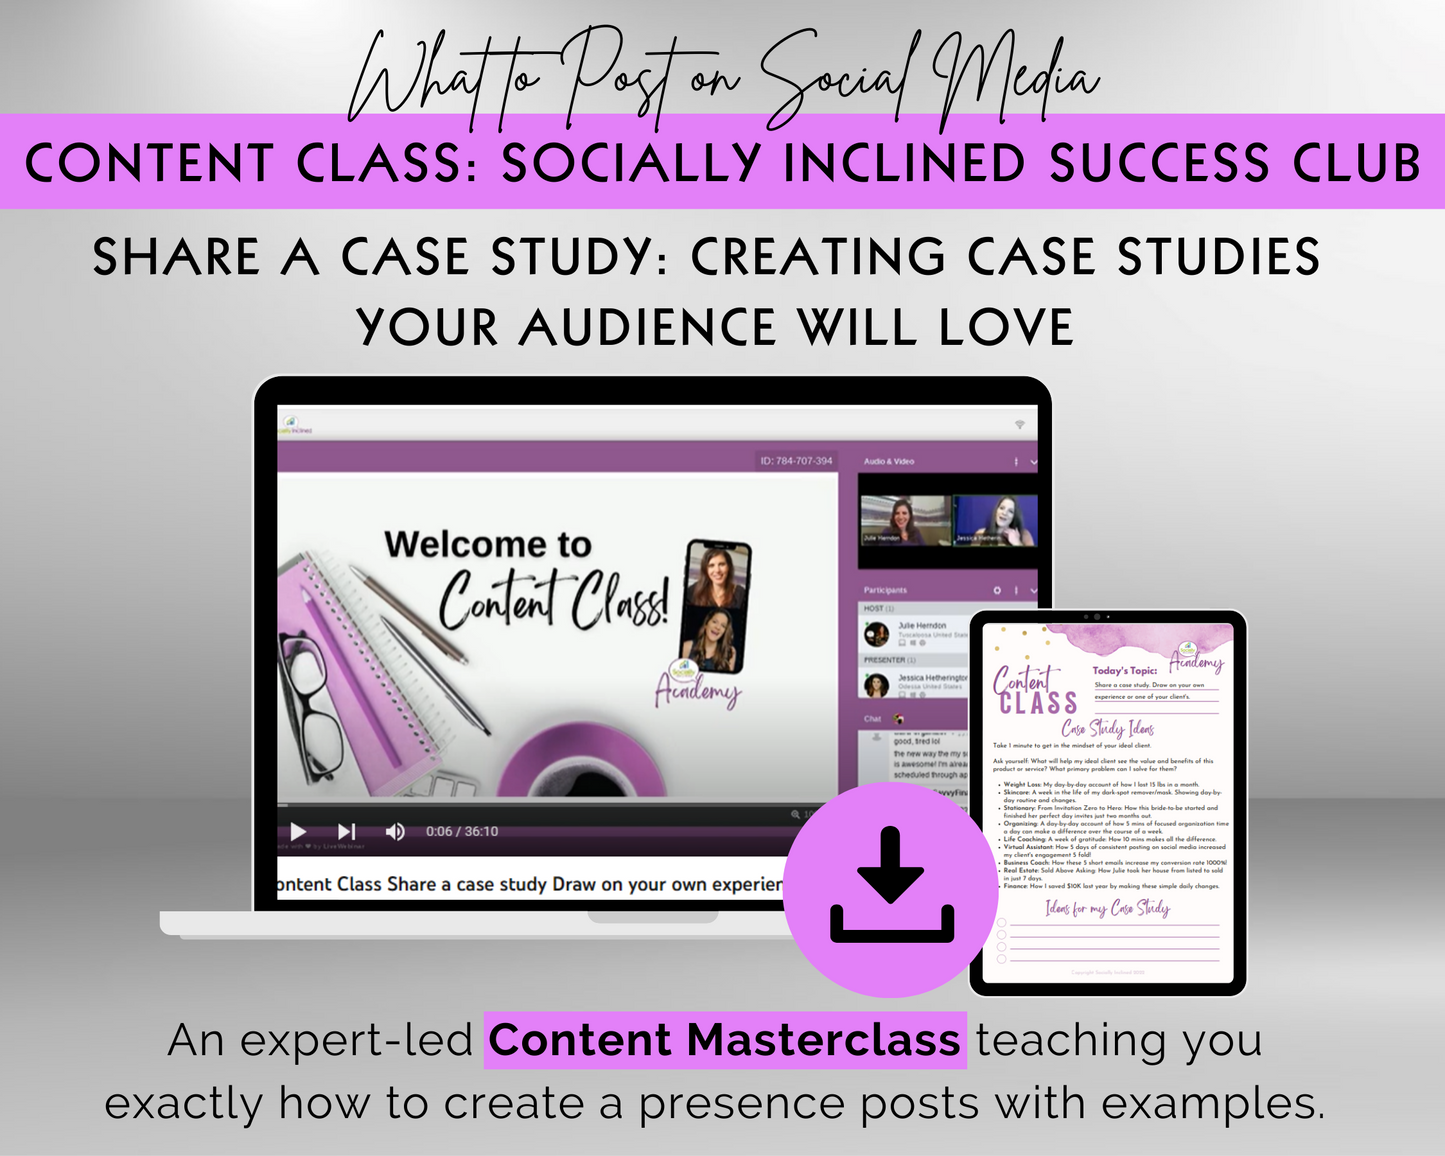 Content Class - Share a case study: Creating Case Studies Your Audience Will Love Masterclass